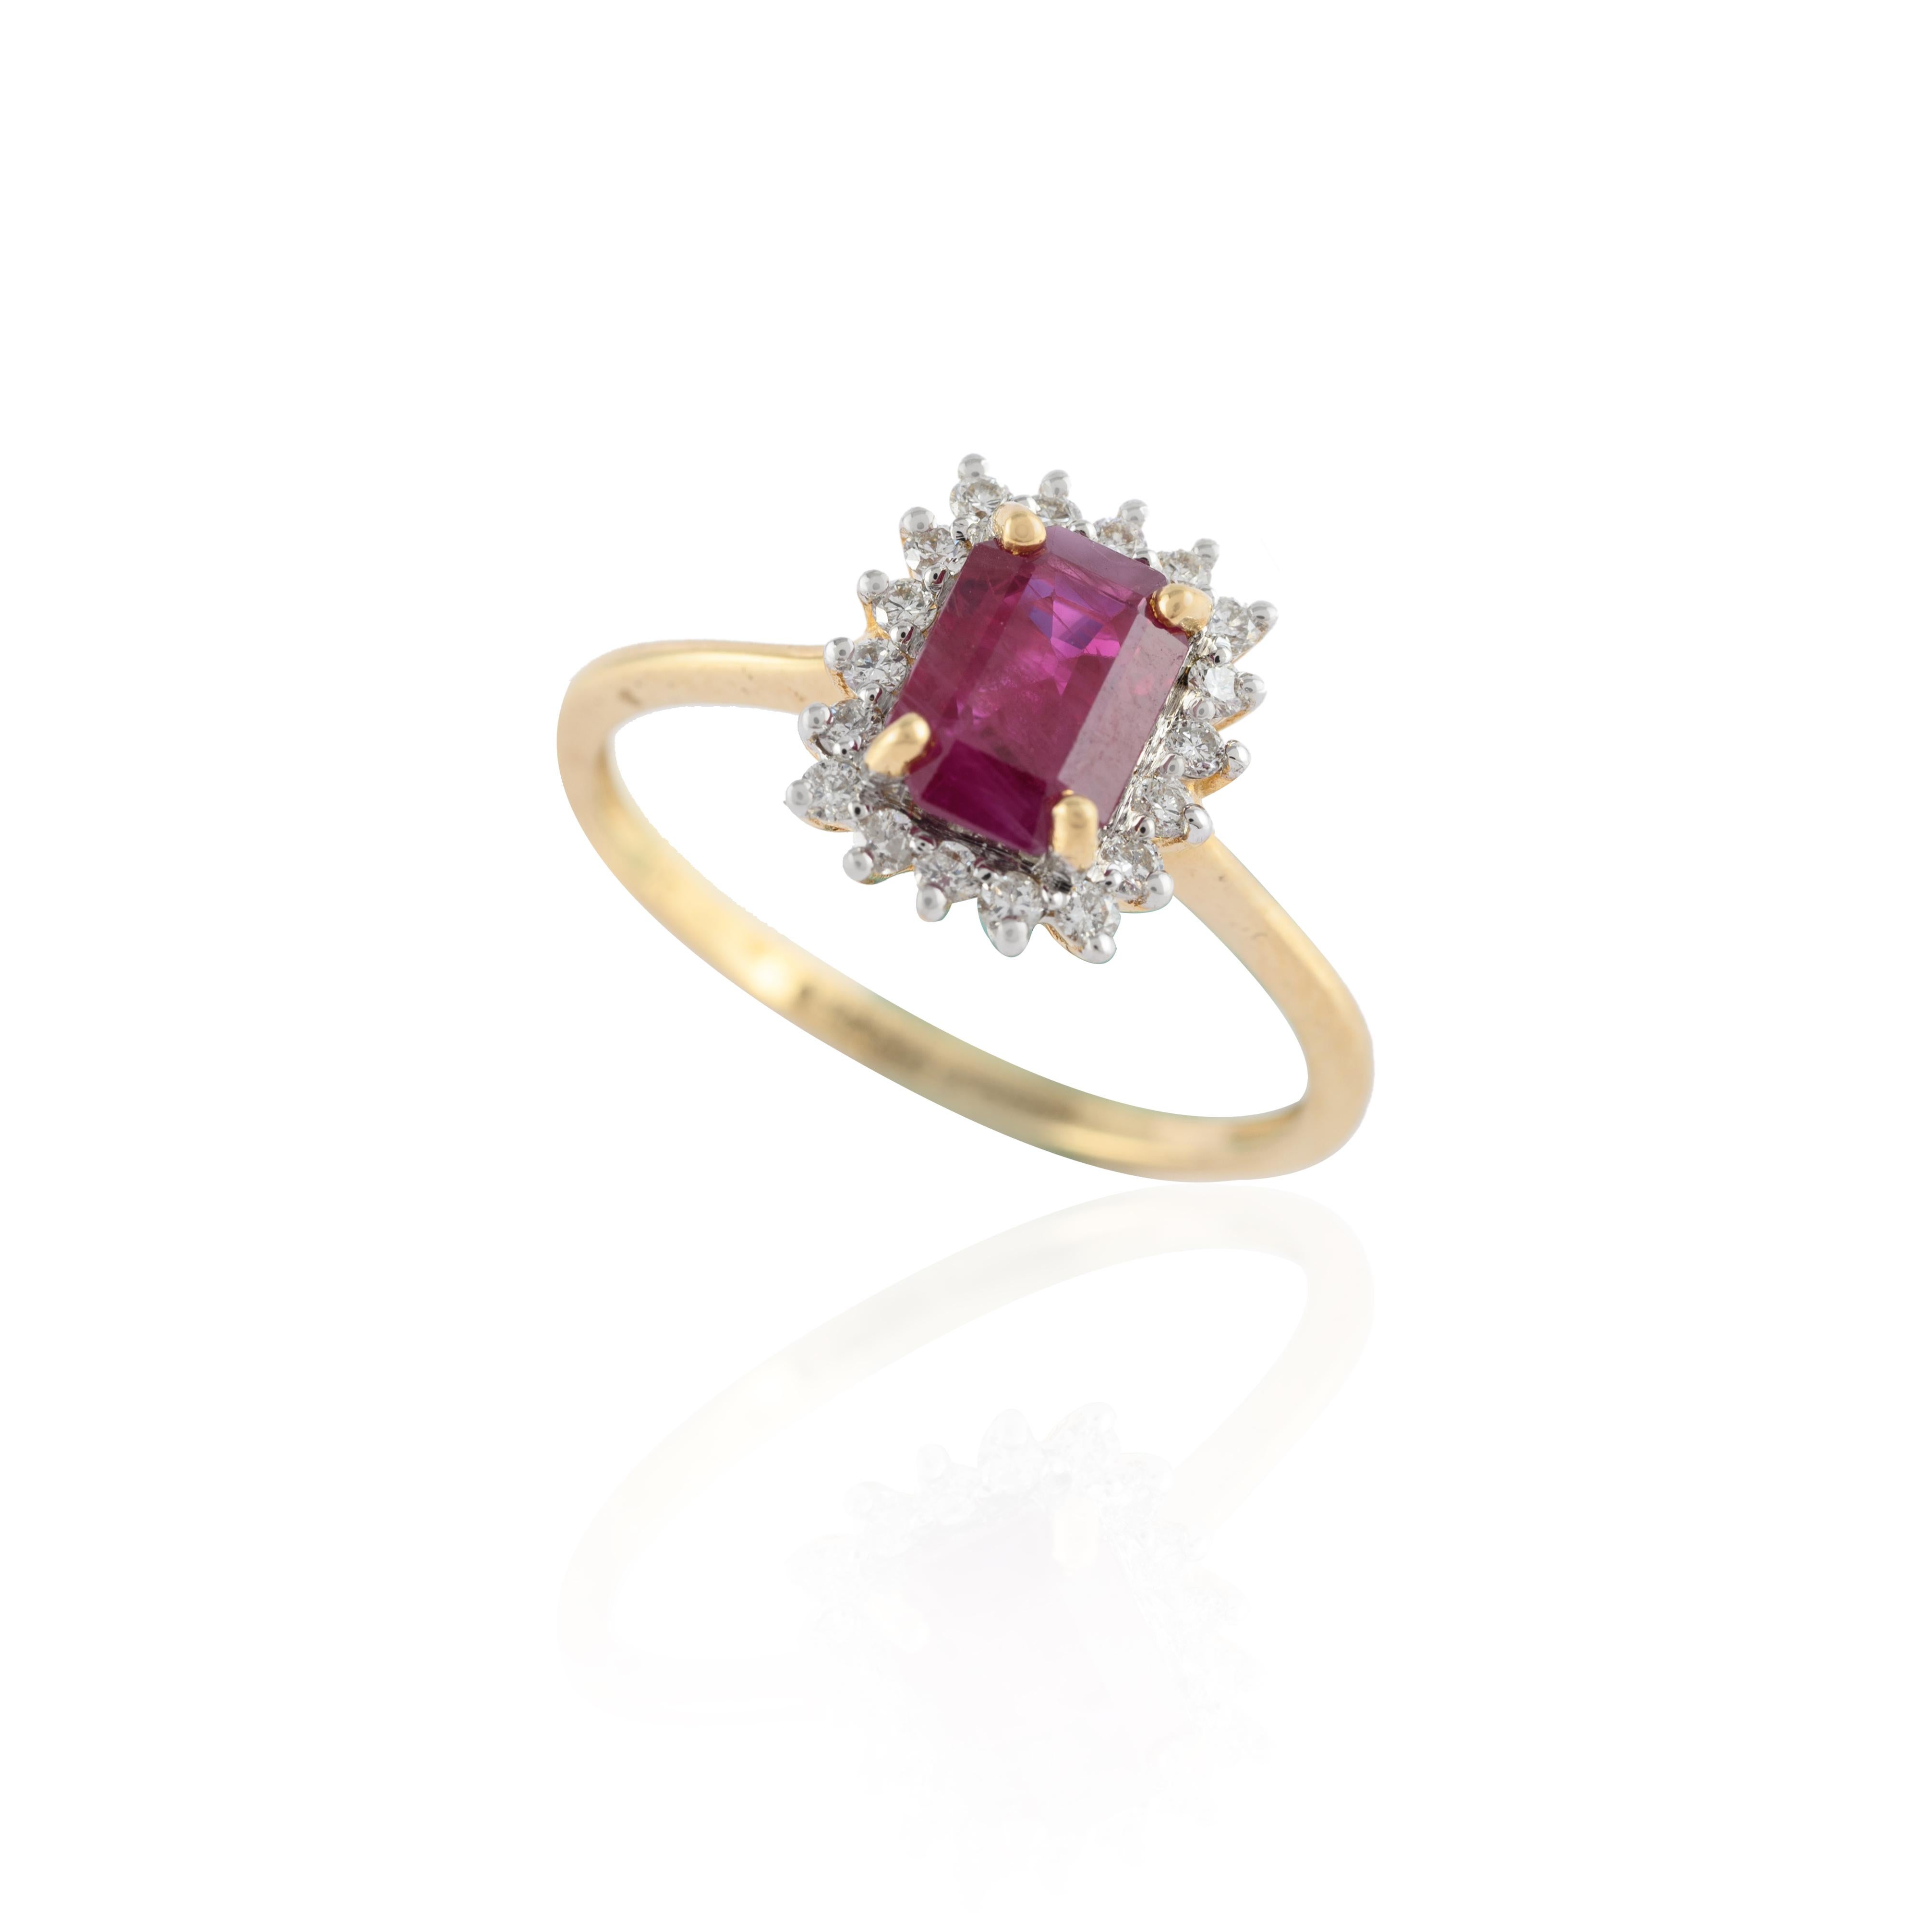 For Sale:  Genuine Octagon Cut Halo Diamond Ruby Ring in 14k Solid Yellow Gold 5